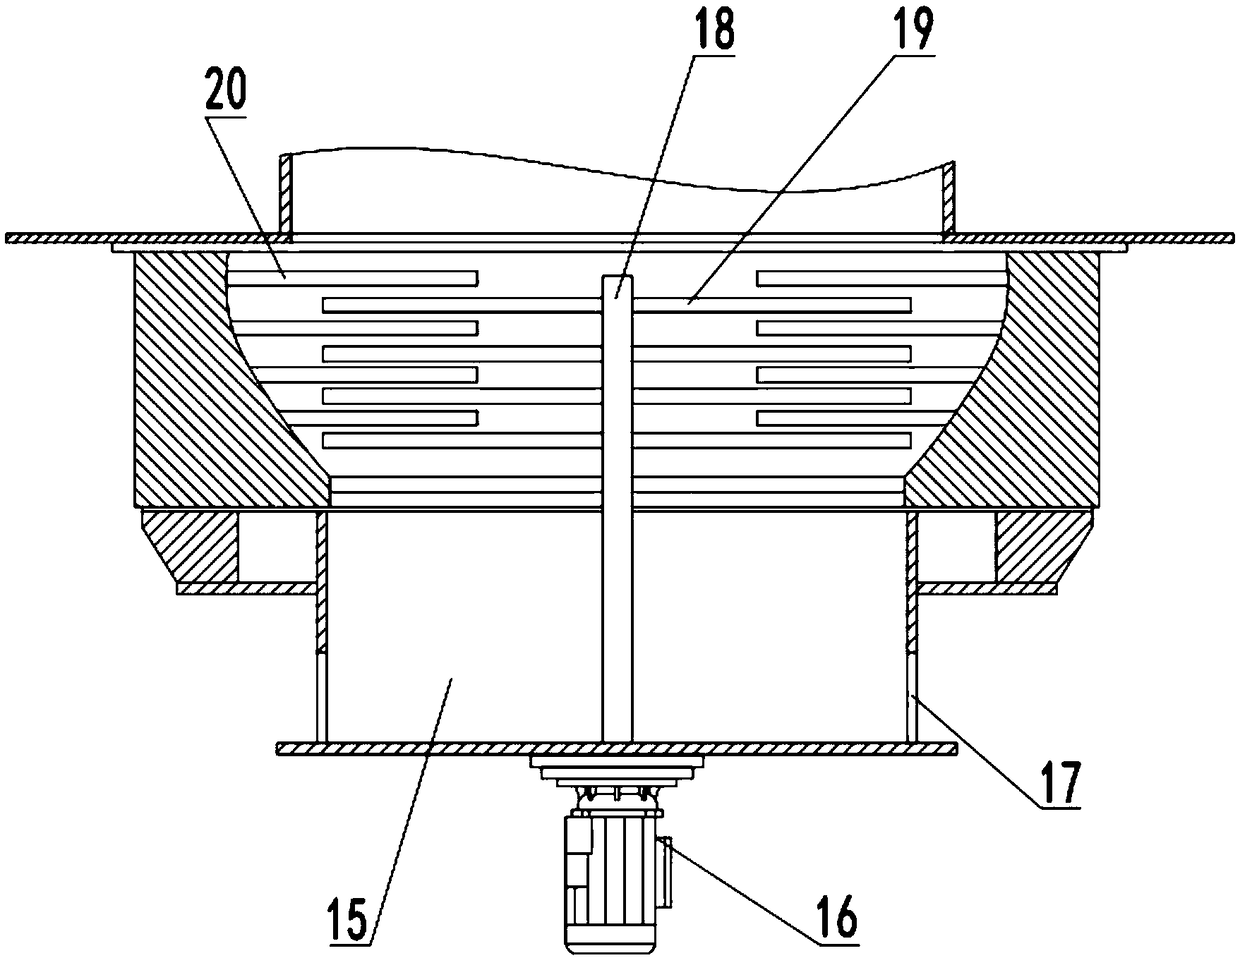 Two-level breaking recovery device for corrugated cases